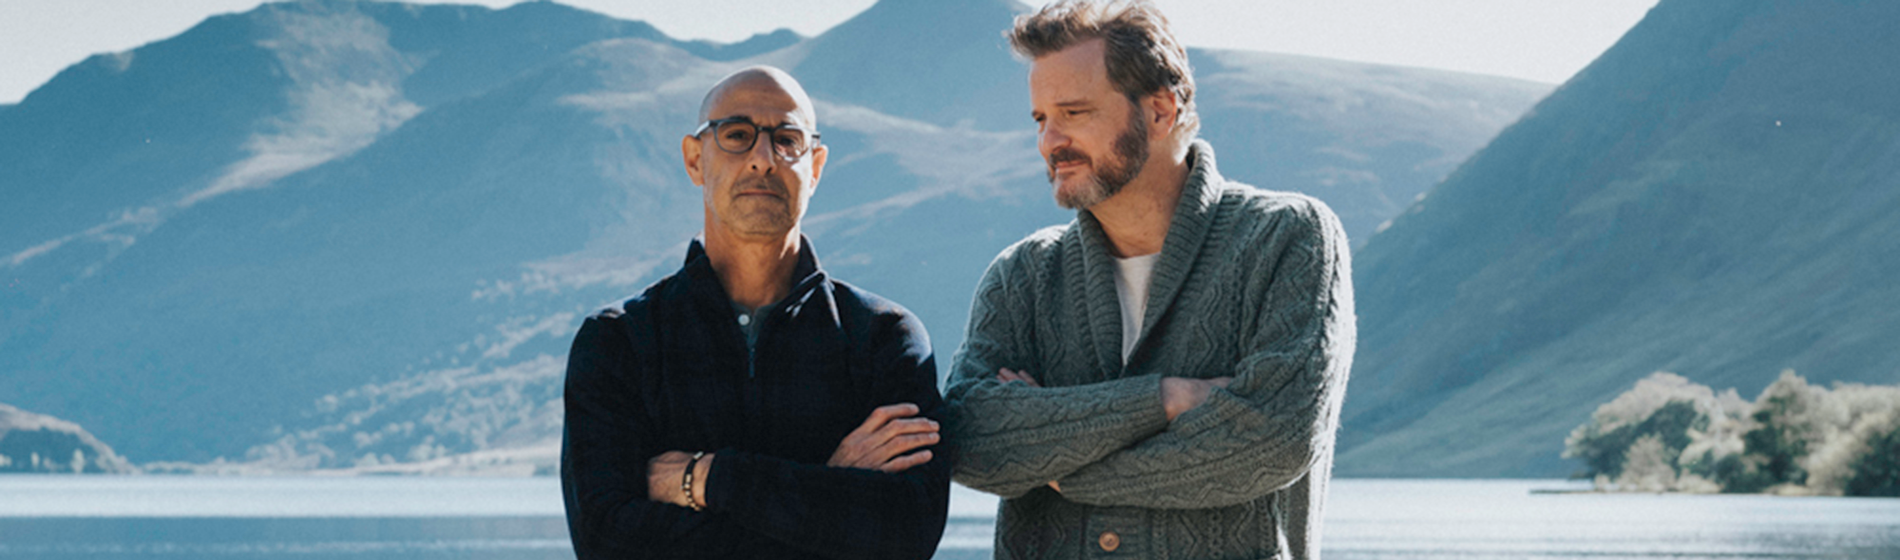 Stanley Tucci and Colin Firth stand side-by-side in from of a lake in a still from Supernova